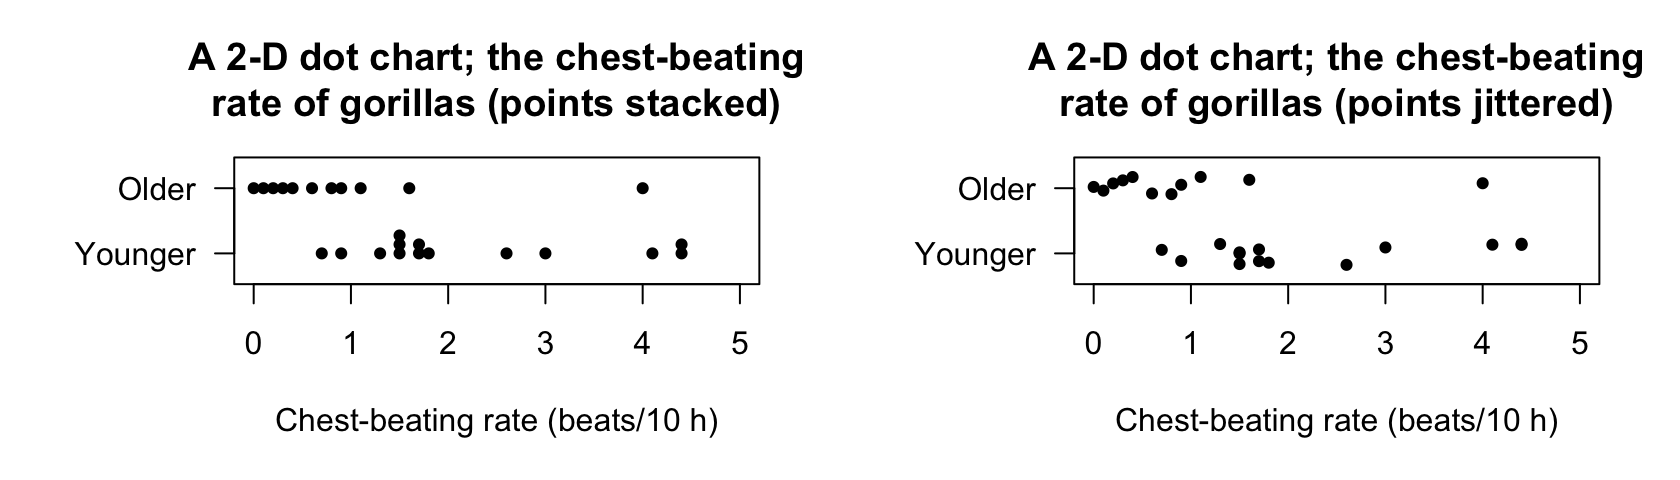 Two variations of a 2-D dot chart for the chest-beating data to avoid overplotting: stacking (left) and jittering (right)